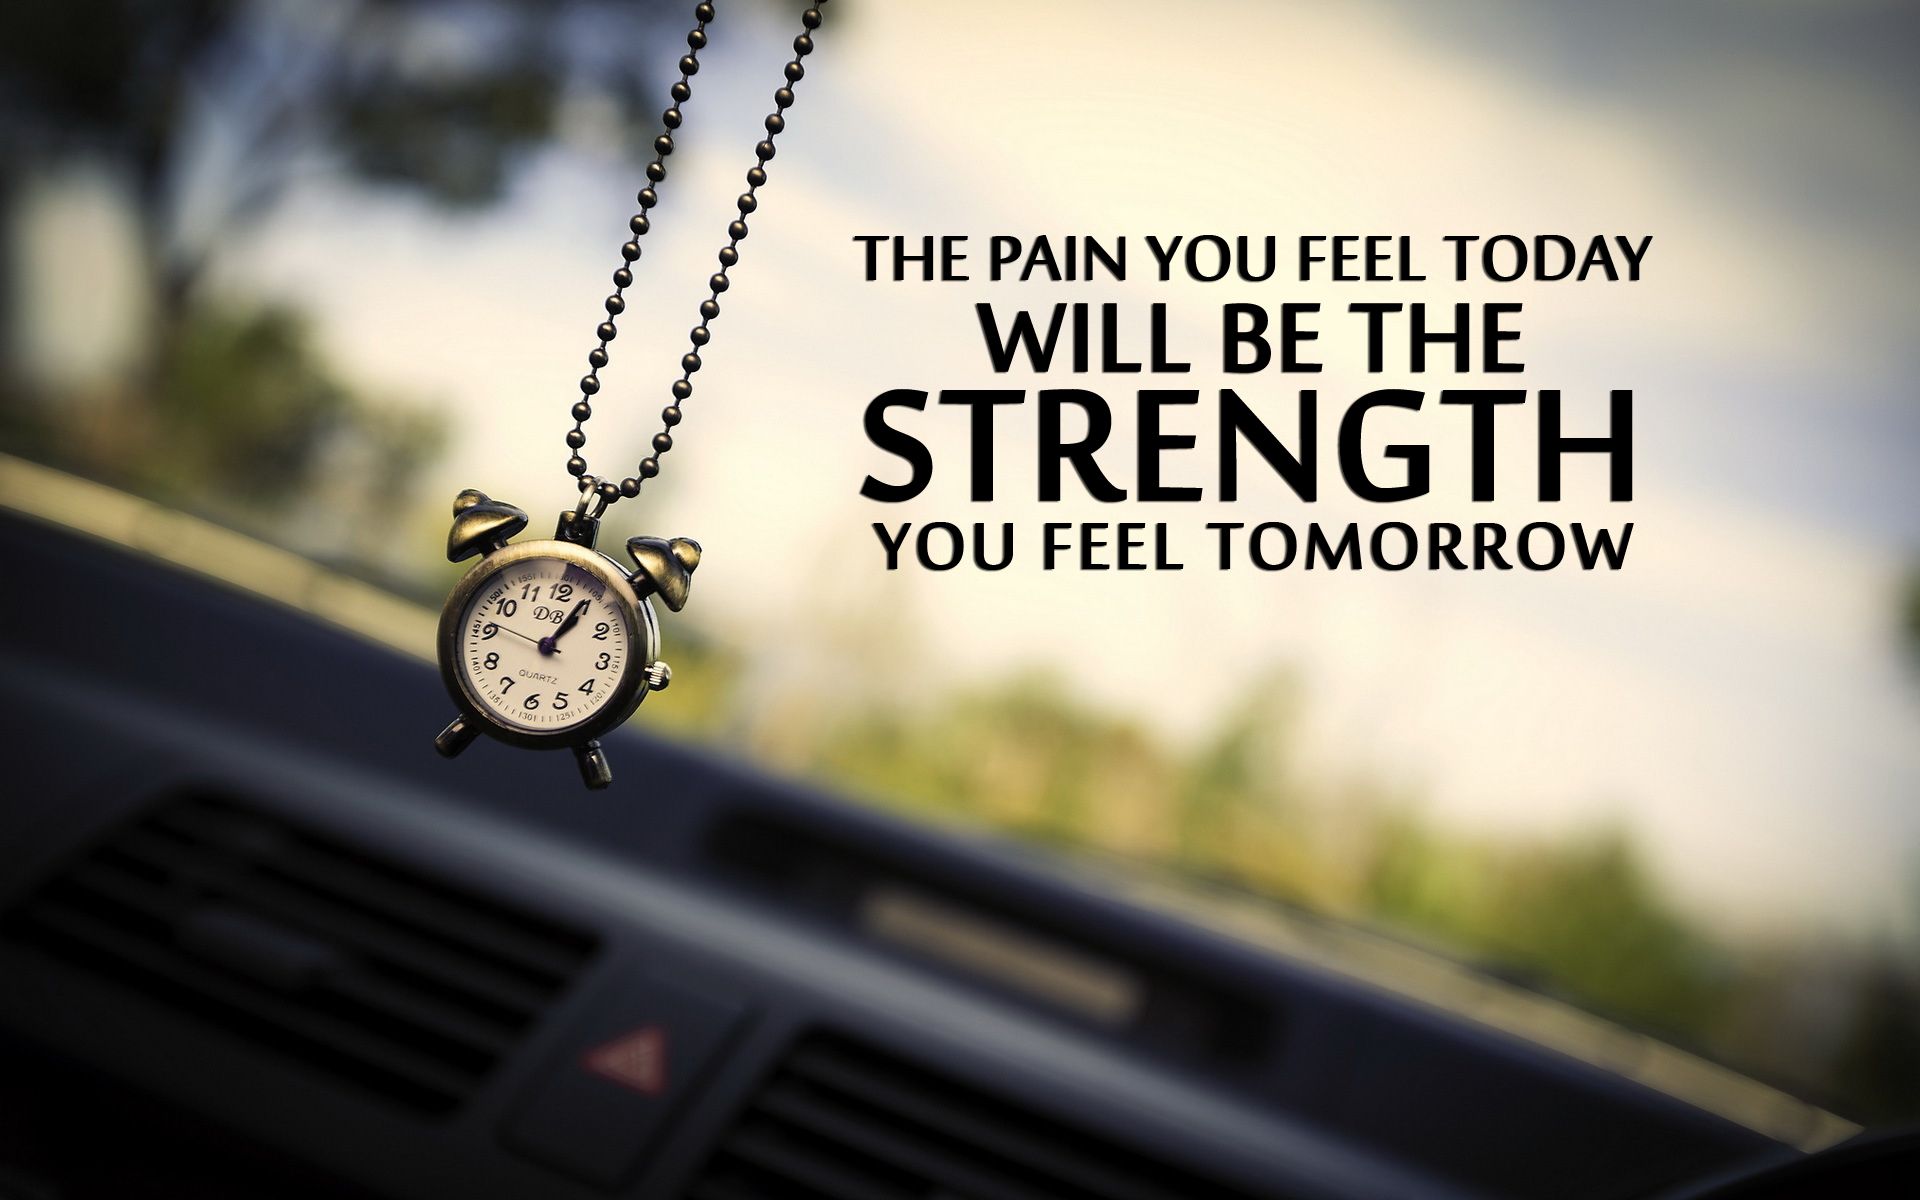 Amazing_Inspirational_Quotes_HD_Wallpaper_Laptop_Background.jpg